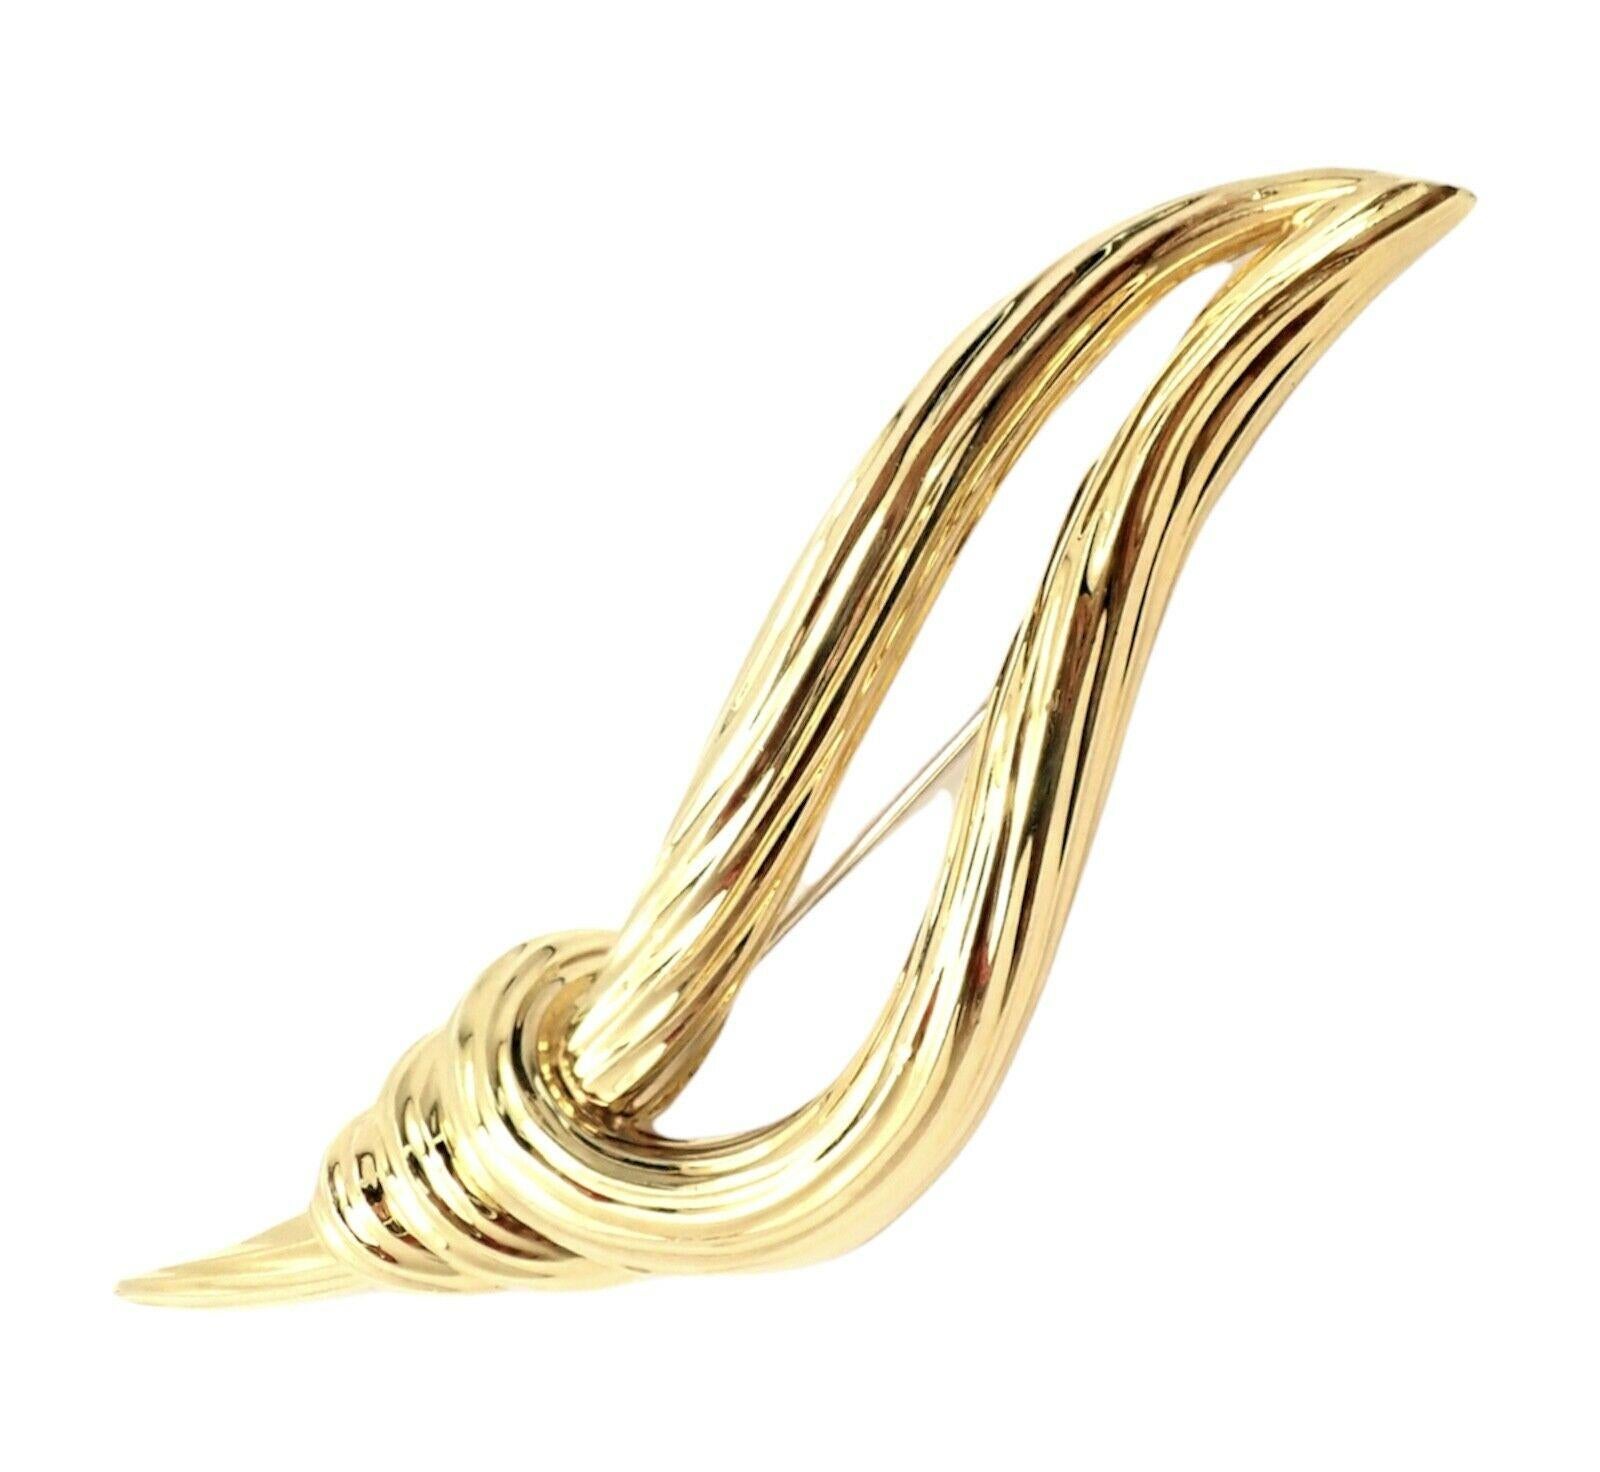 18k Yellow Gold Olympic Torch Pin Brooch By Henry Dunay. 
Details:
Measurements: 23mm x 91mm
Weight: 33.7 grams
Stamped Hallmarks: Dunay 18k
*Free shipping within the United States*
YOUR PRICE: $4,500
Ti740omrd